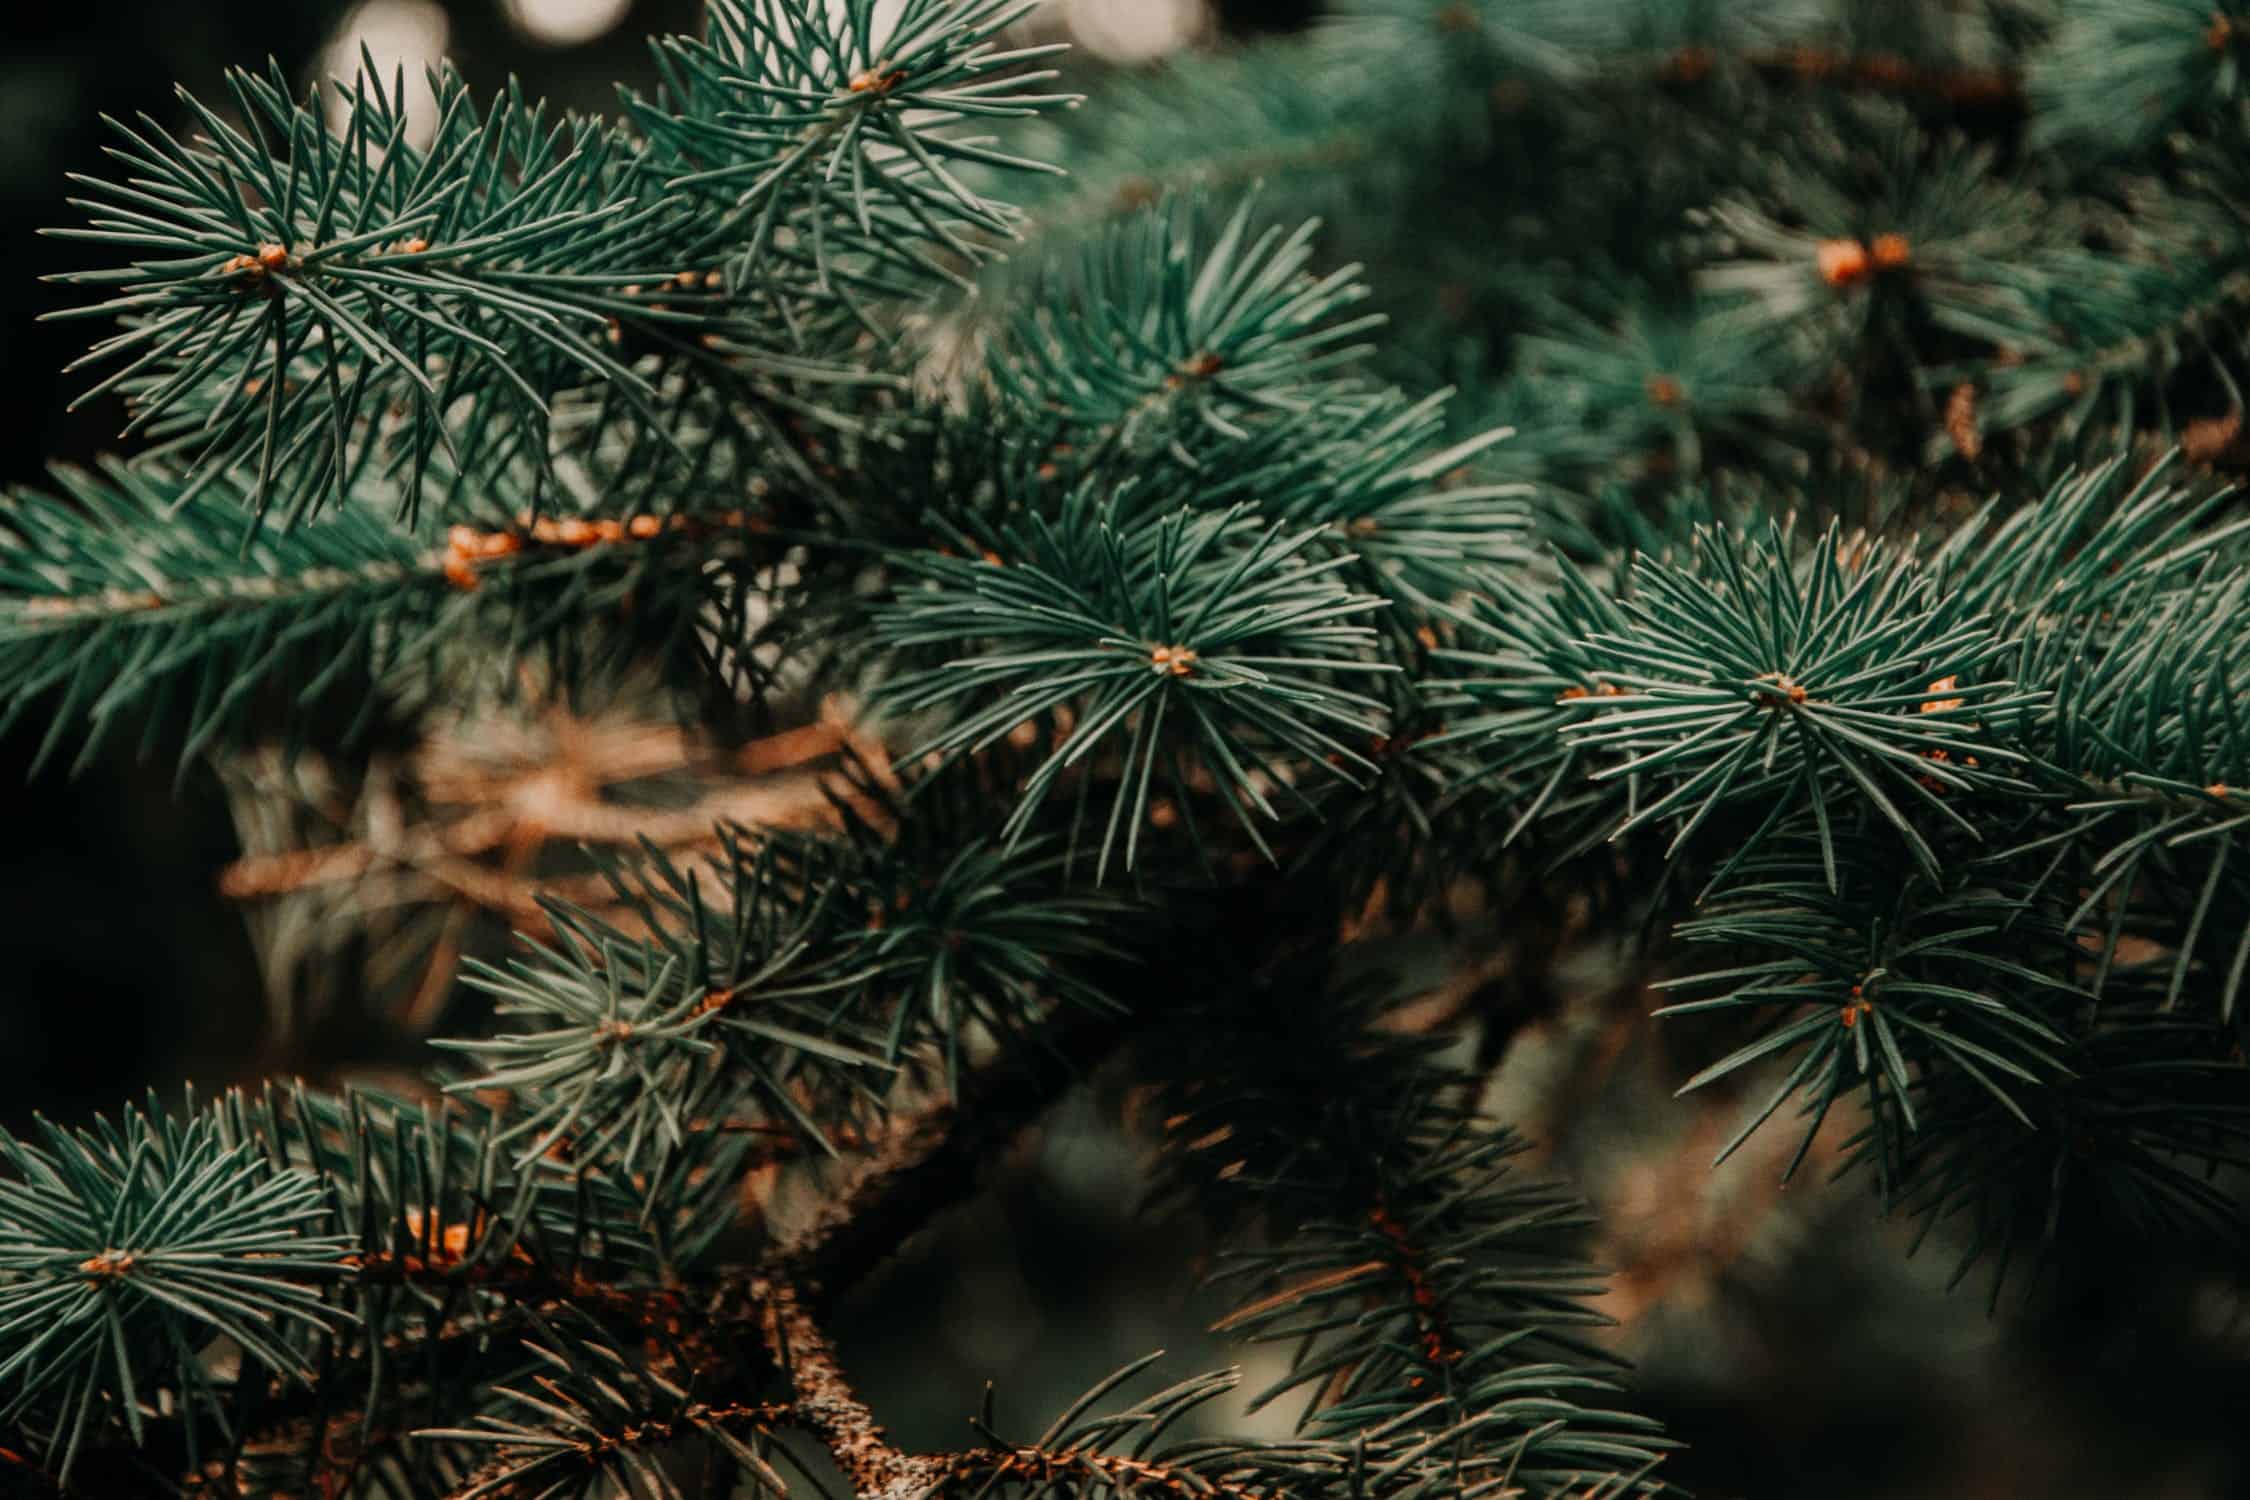 Christmas tree recalled over fire risk in Ontario in Canada